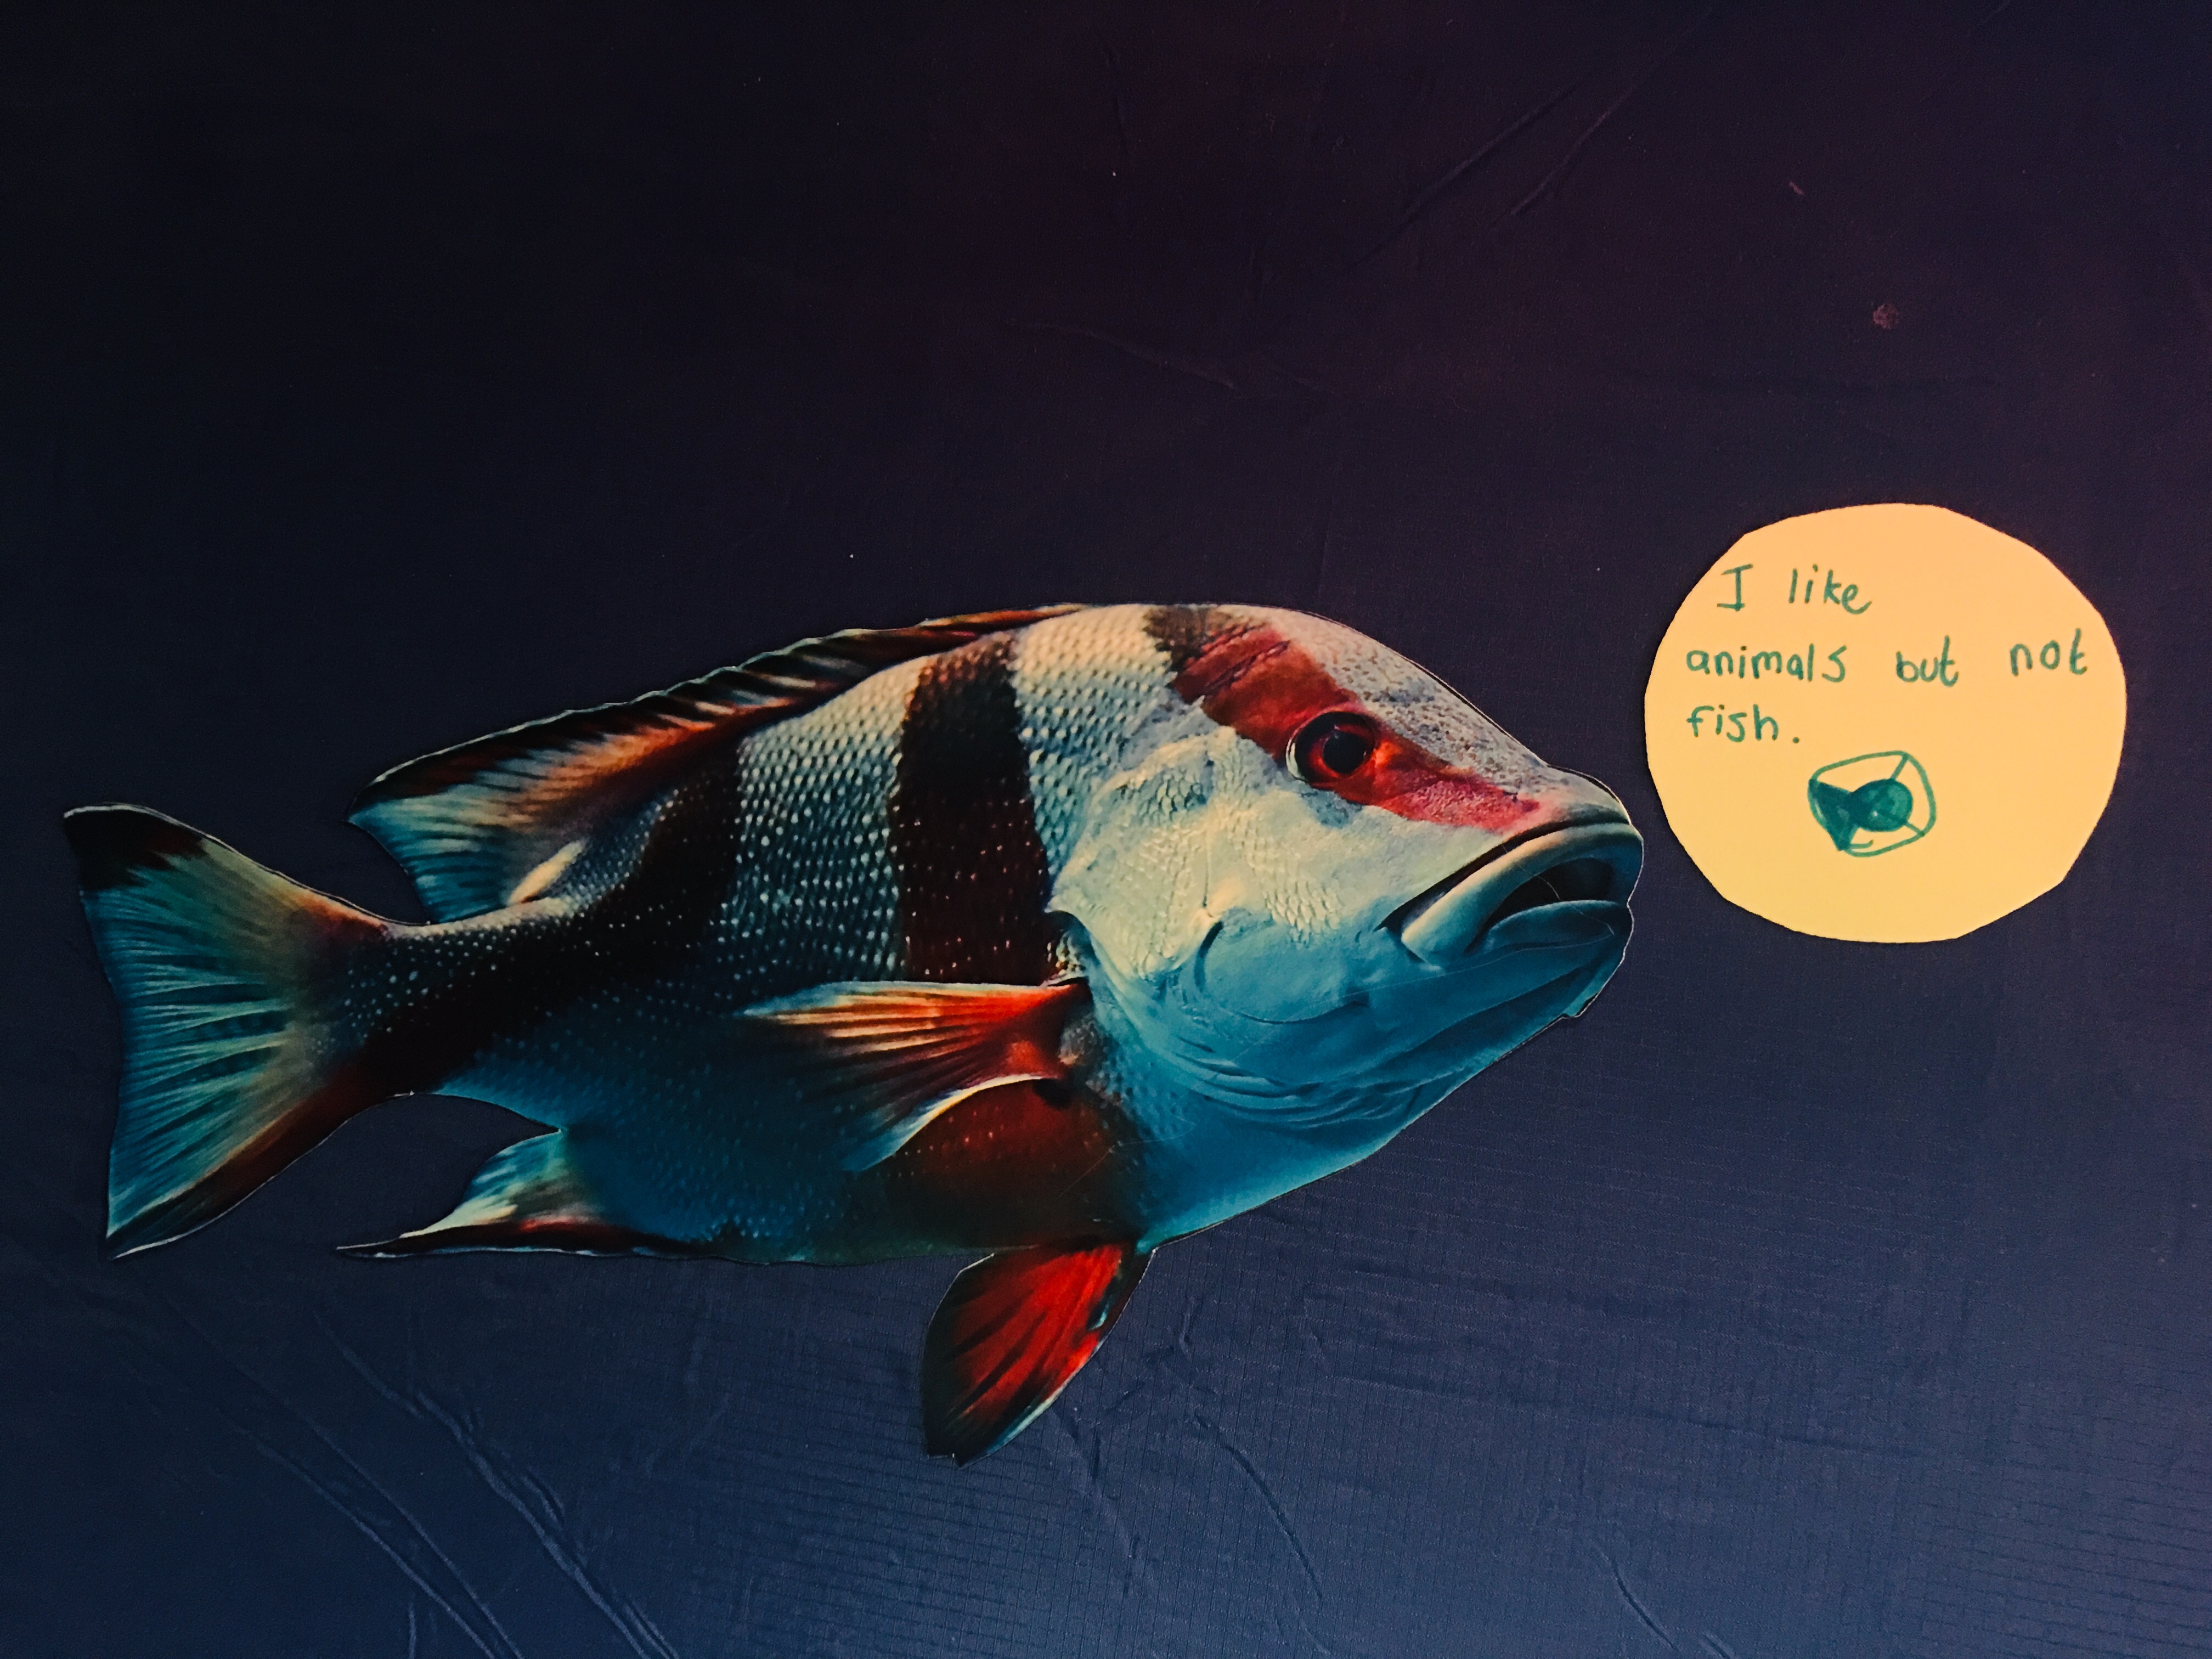 Fish with thought bubble that reads "I like animals but not fish"